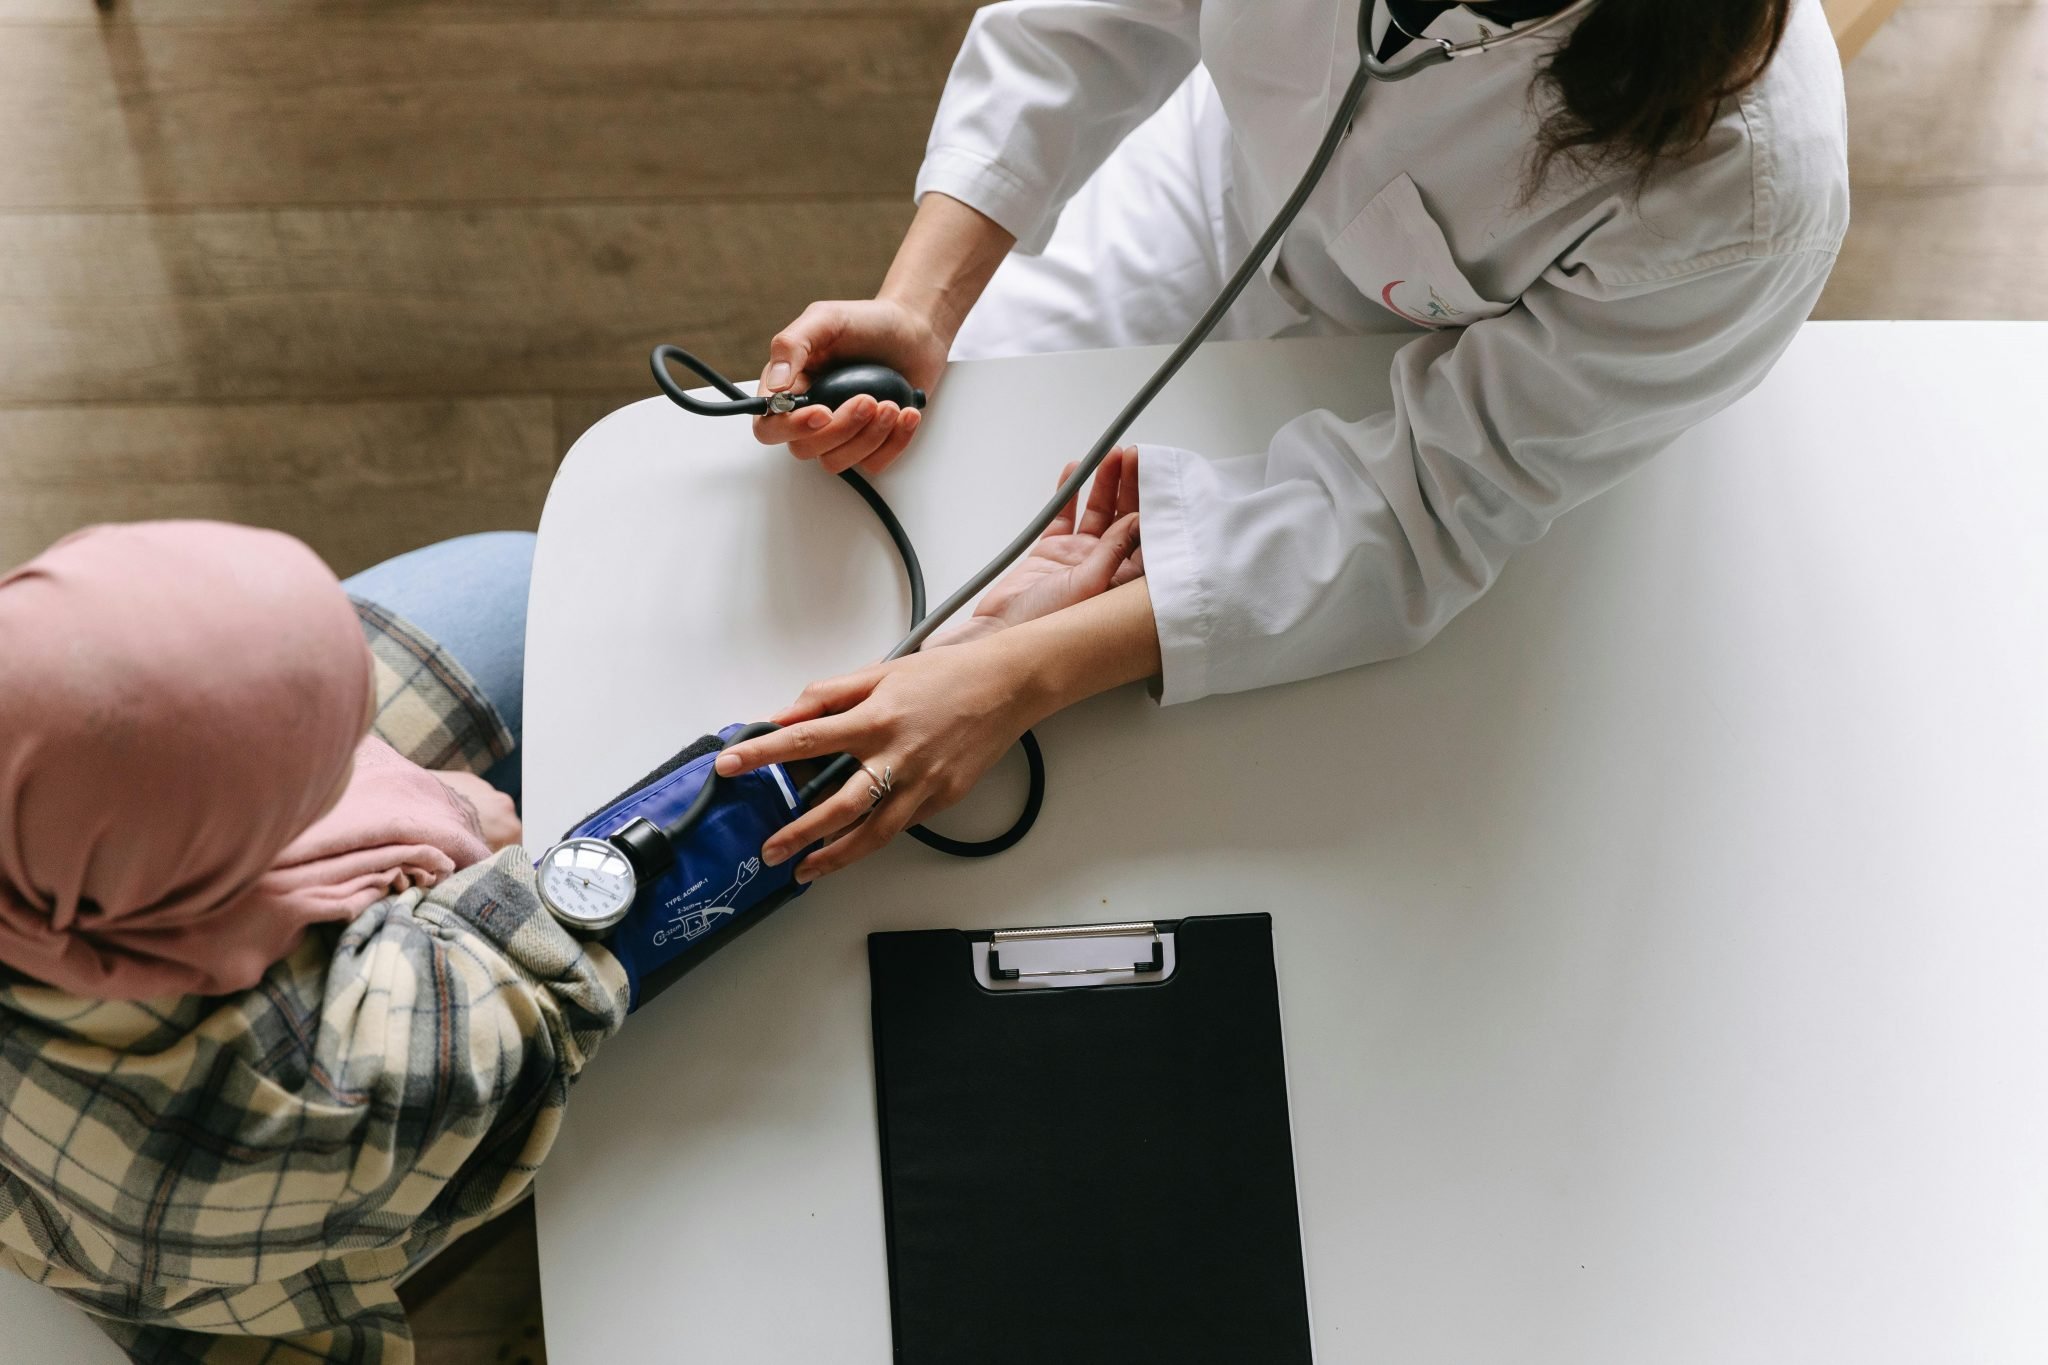 medical professional using blood pressure machine on patient from above